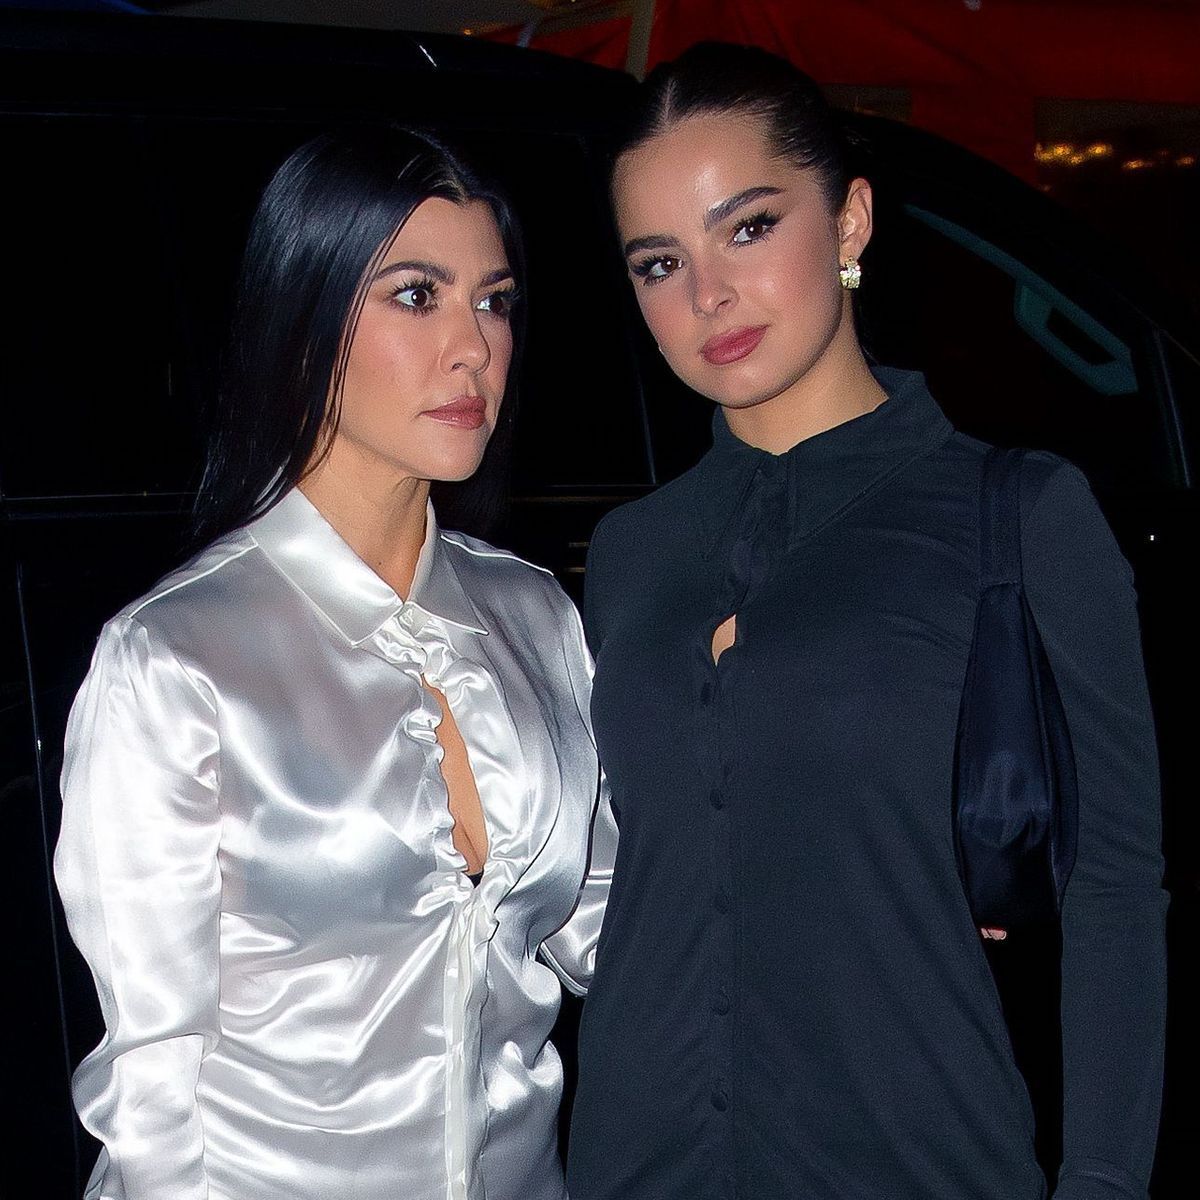 Act your age: Why is Kourtney Kardashian hanging out with Addison Rae ...